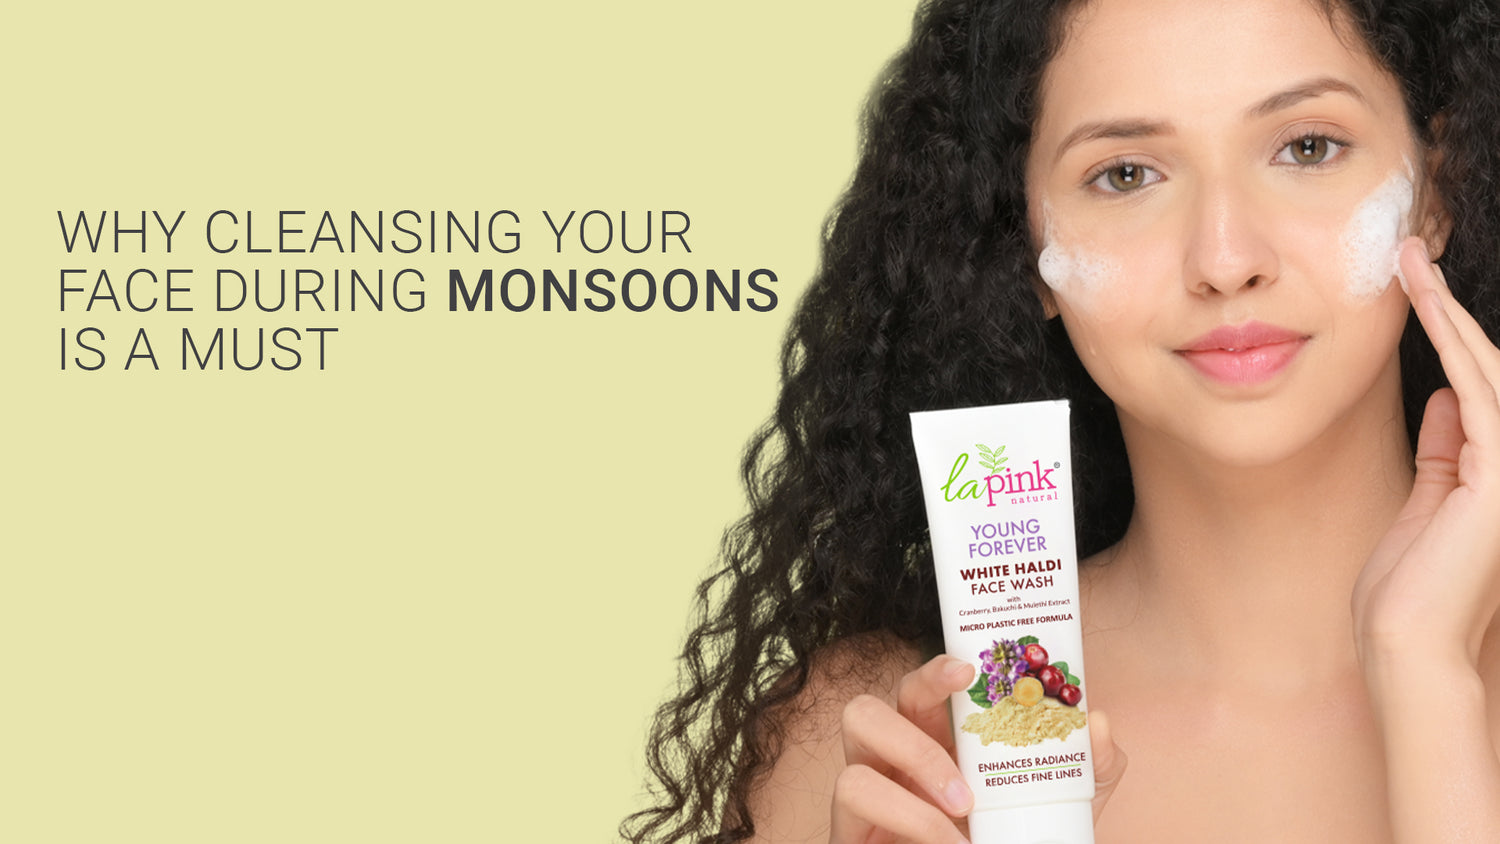 Why Cleansing your face during Monsoons is a must